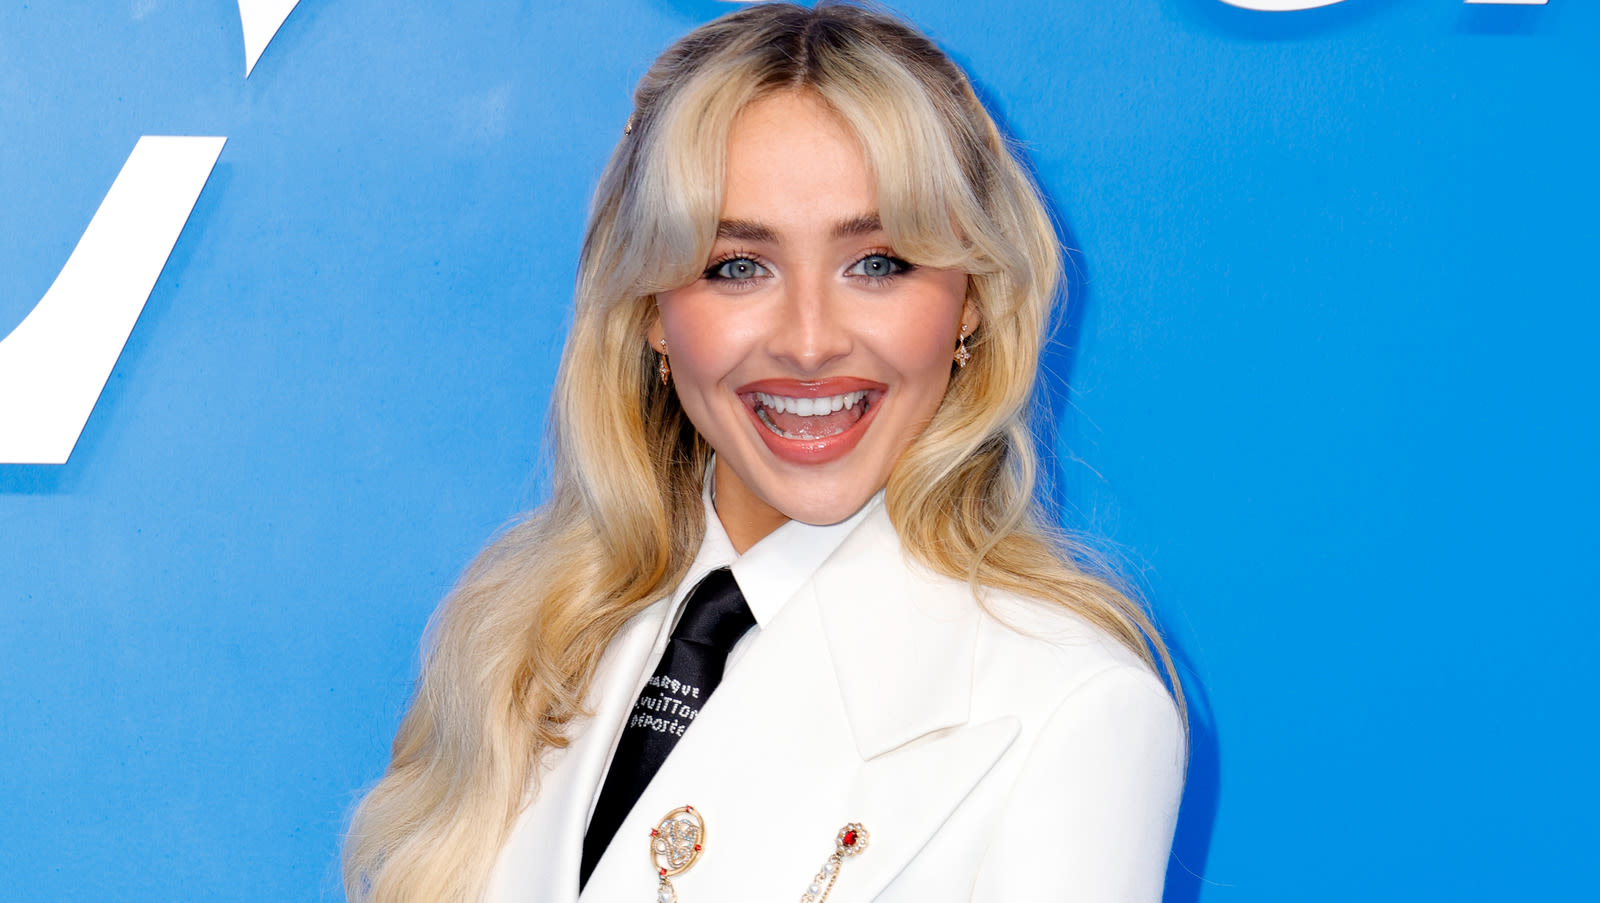 The Simpsons Star You Didn't Know Is Related To Sabrina Carpenter - Looper